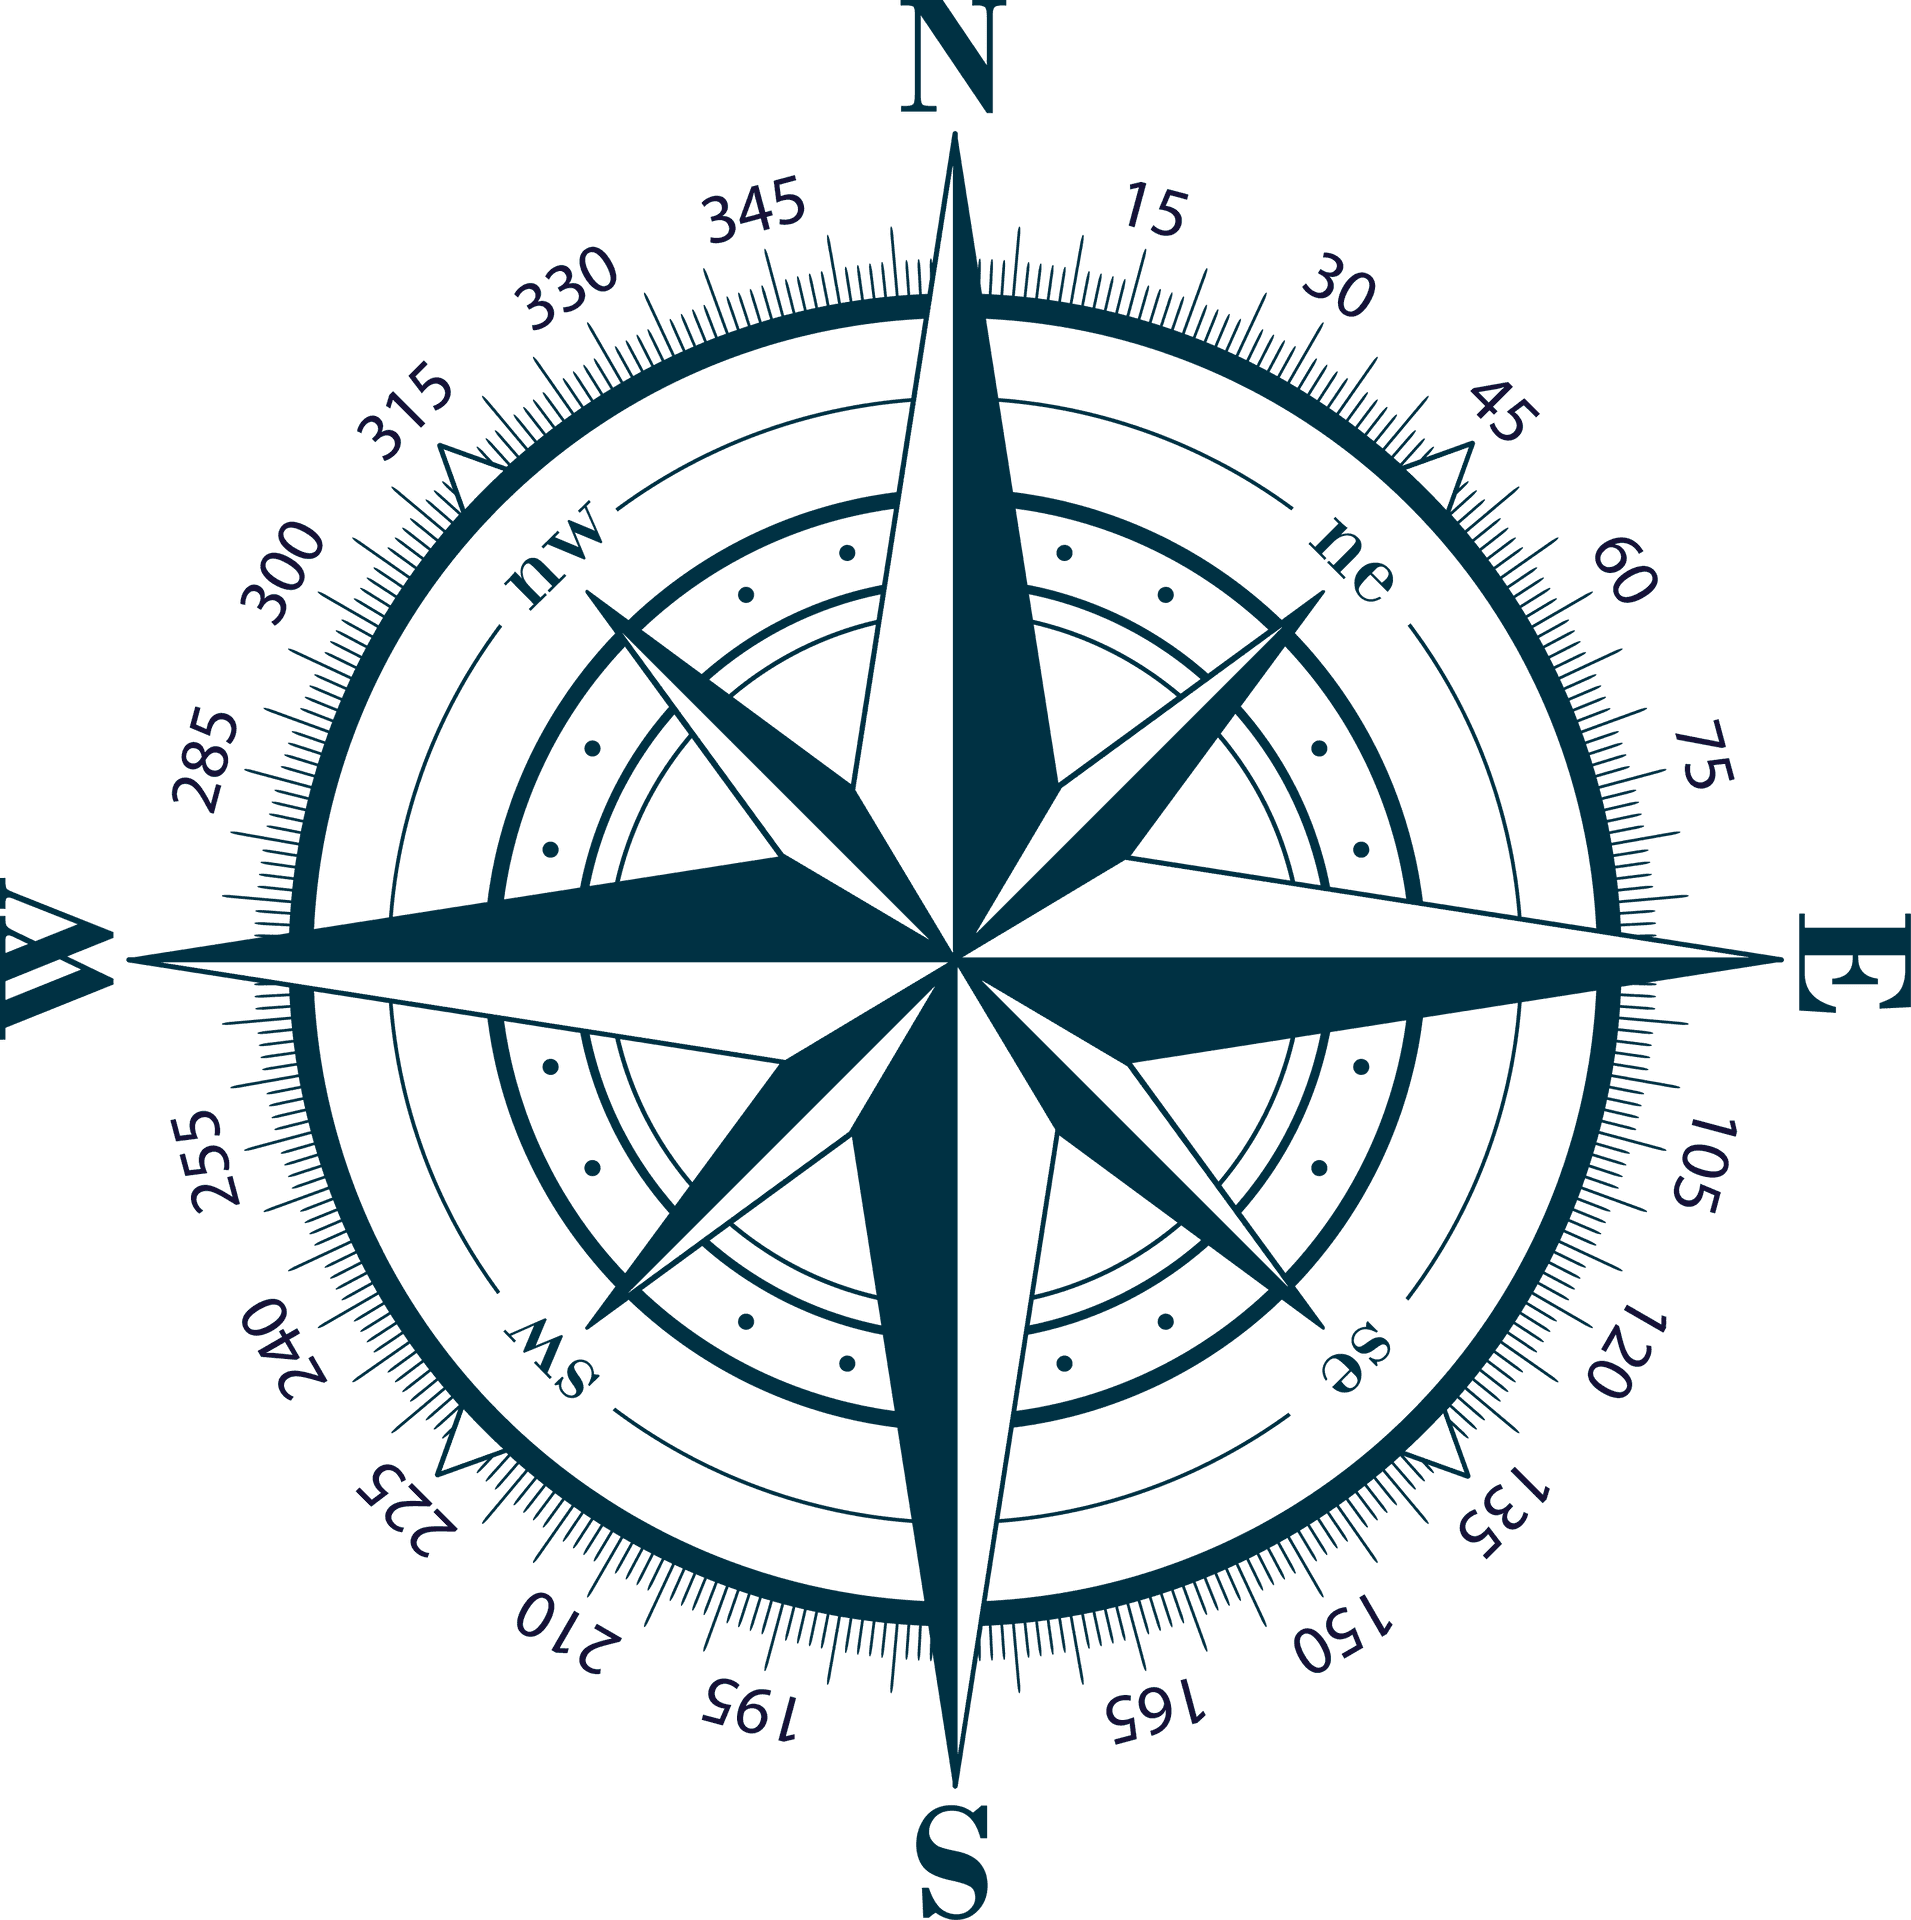 Download Compass Rose Nautical Chart | Wallpapers.com